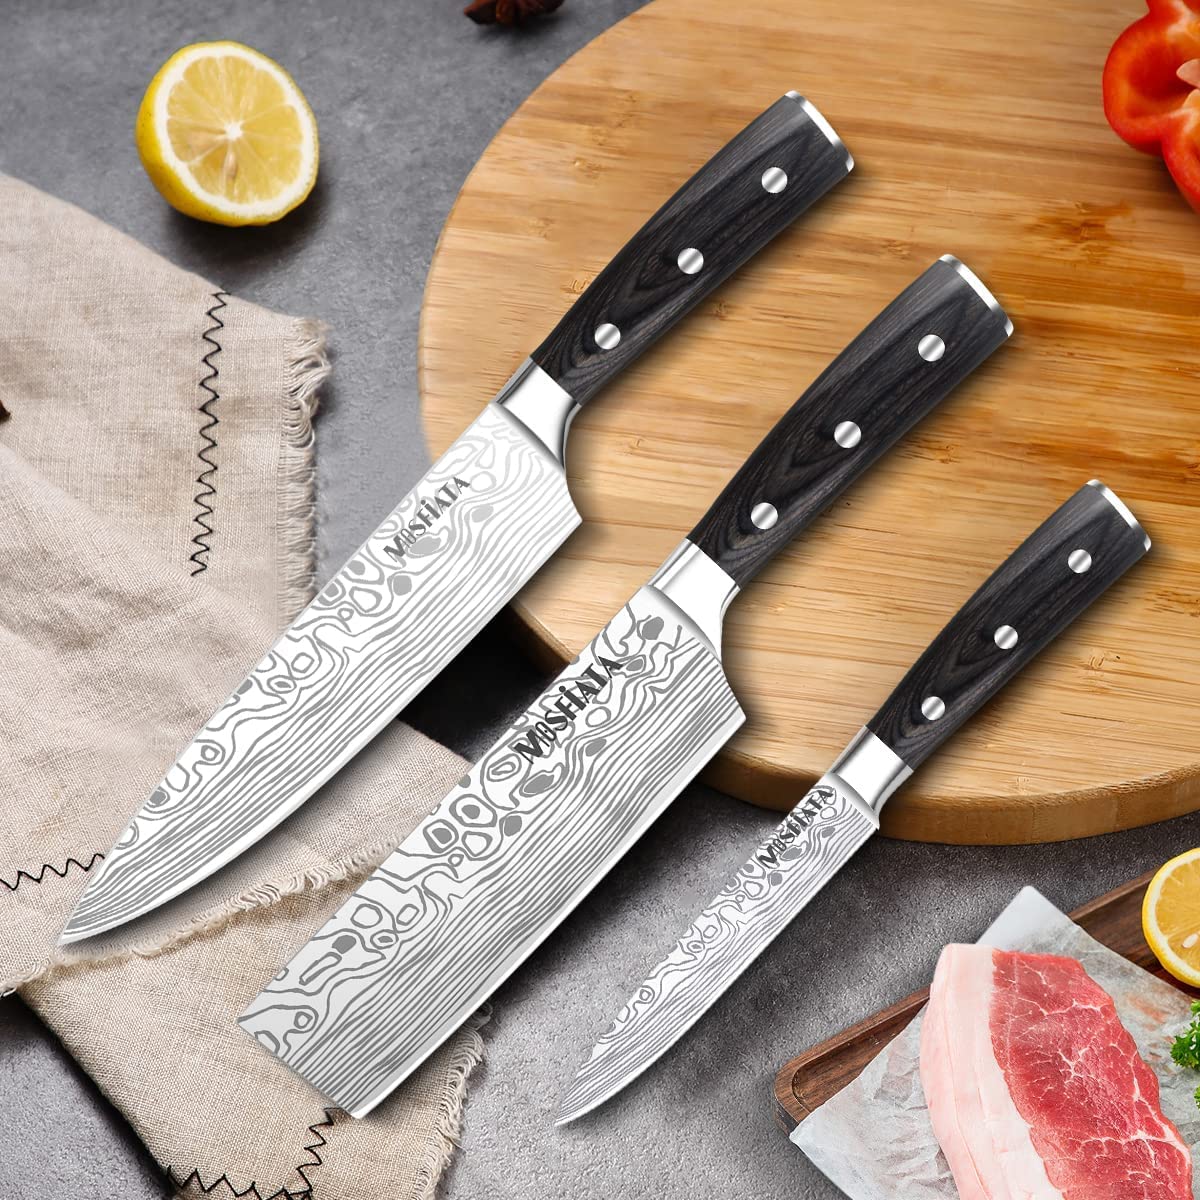 MOSFiATA Professional Chef Knife Set with German High Carbon Stainless Steel Kitchen Knife Set 3 PCS-8" Chefs Knife &7" Nakiri Knife&5" Utility Knife